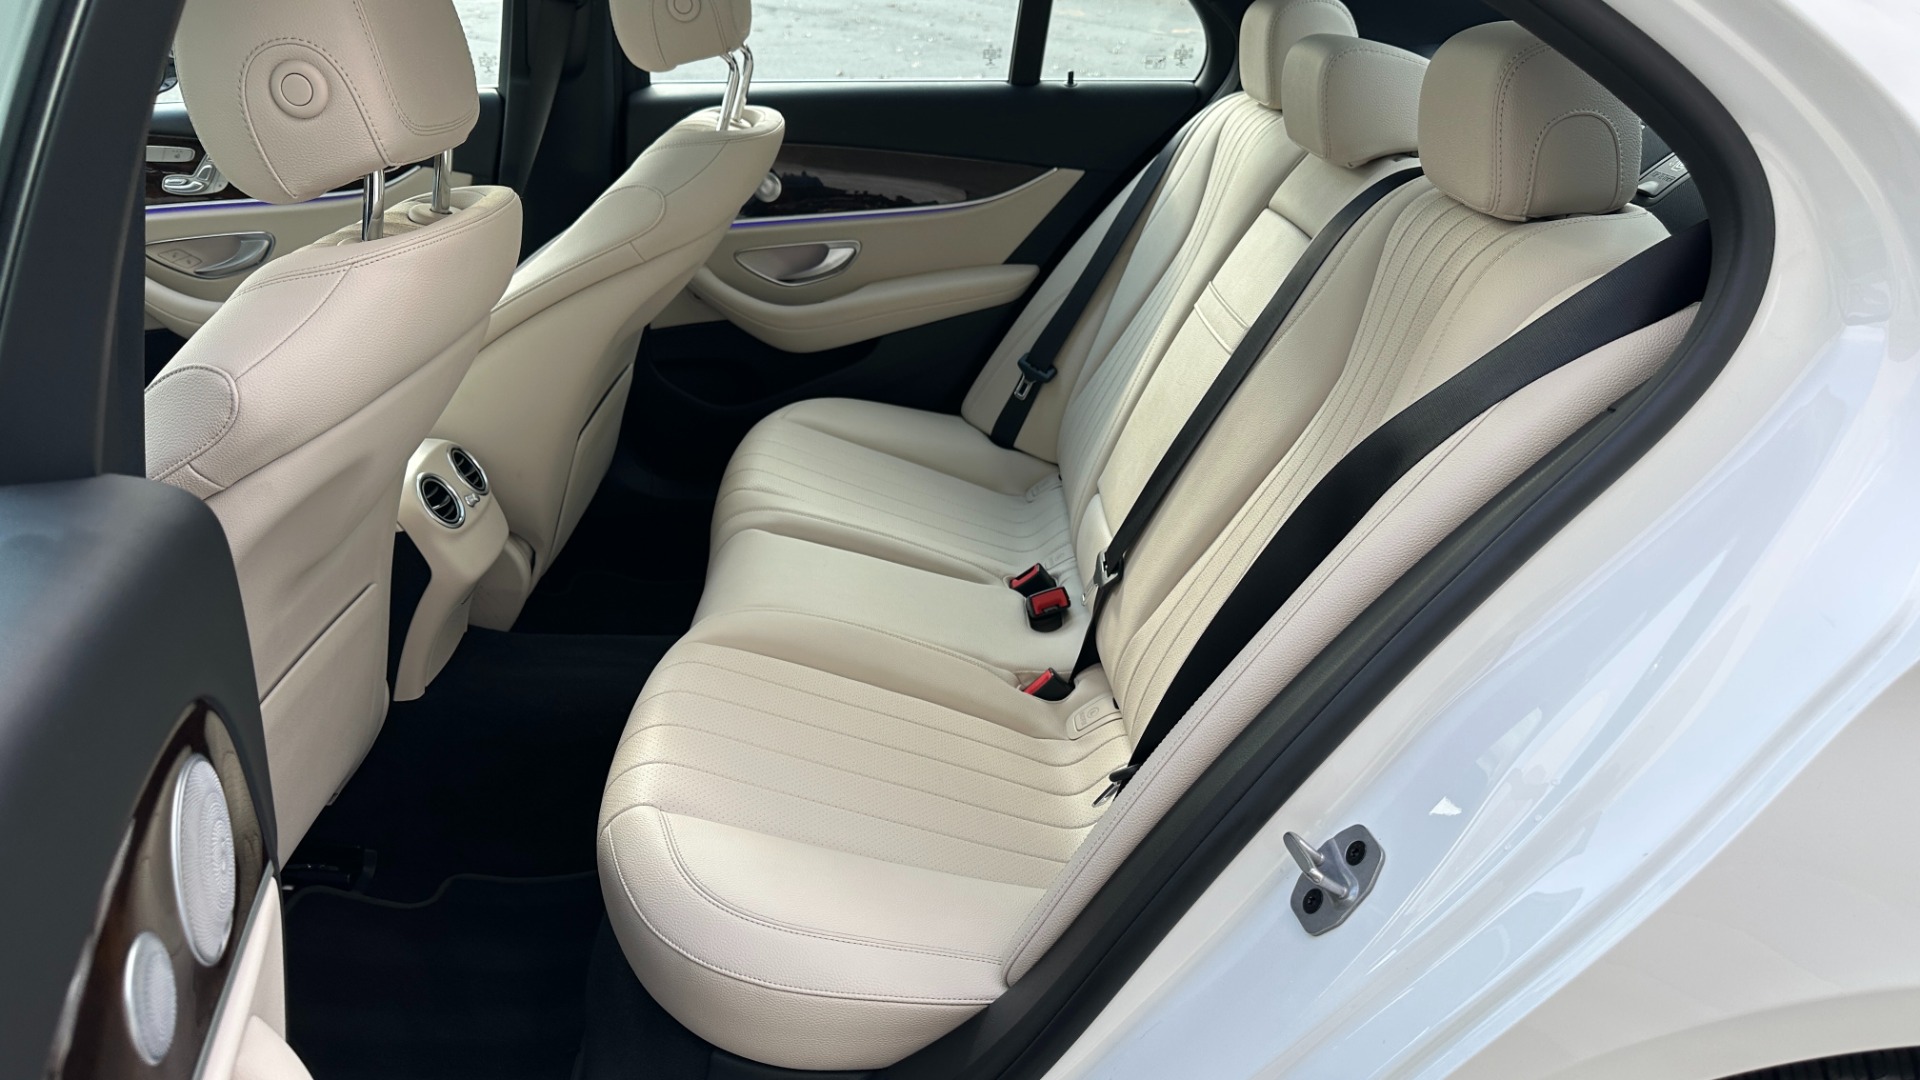 Used 2019 Mercedes-Benz E-Class E300 / PREMIUM PACKAGE / BLIND SPOT / BURMESTER SOUND / HEATED STEERING for sale $35,400 at Formula Imports in Charlotte NC 28227 15